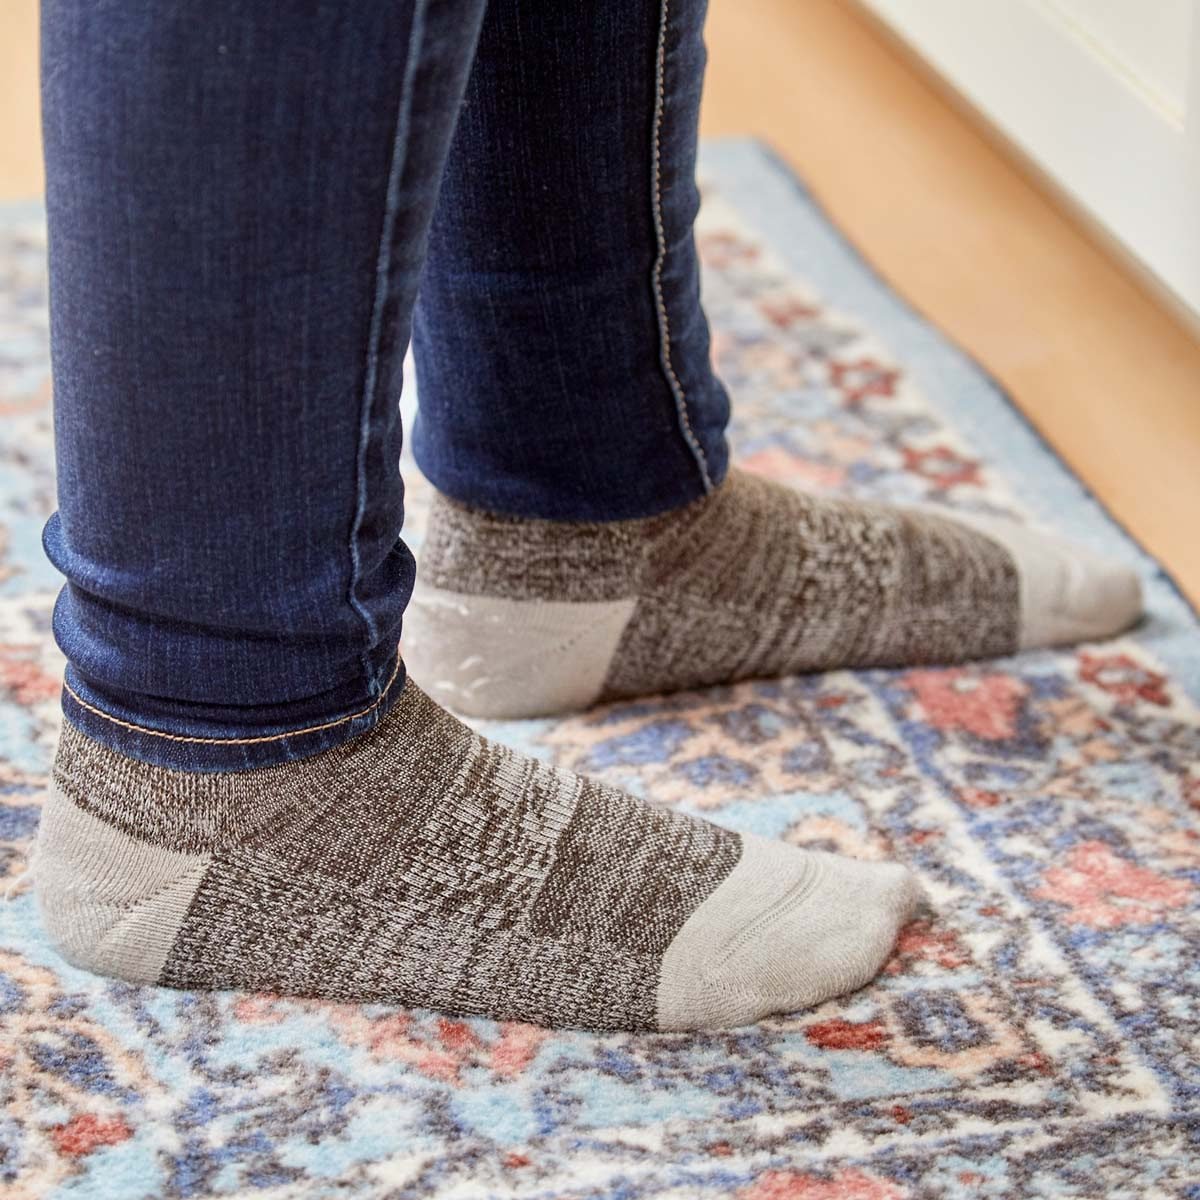 Want to Make a Rug More Comfortable for Standing? Check Out This Genius Hack